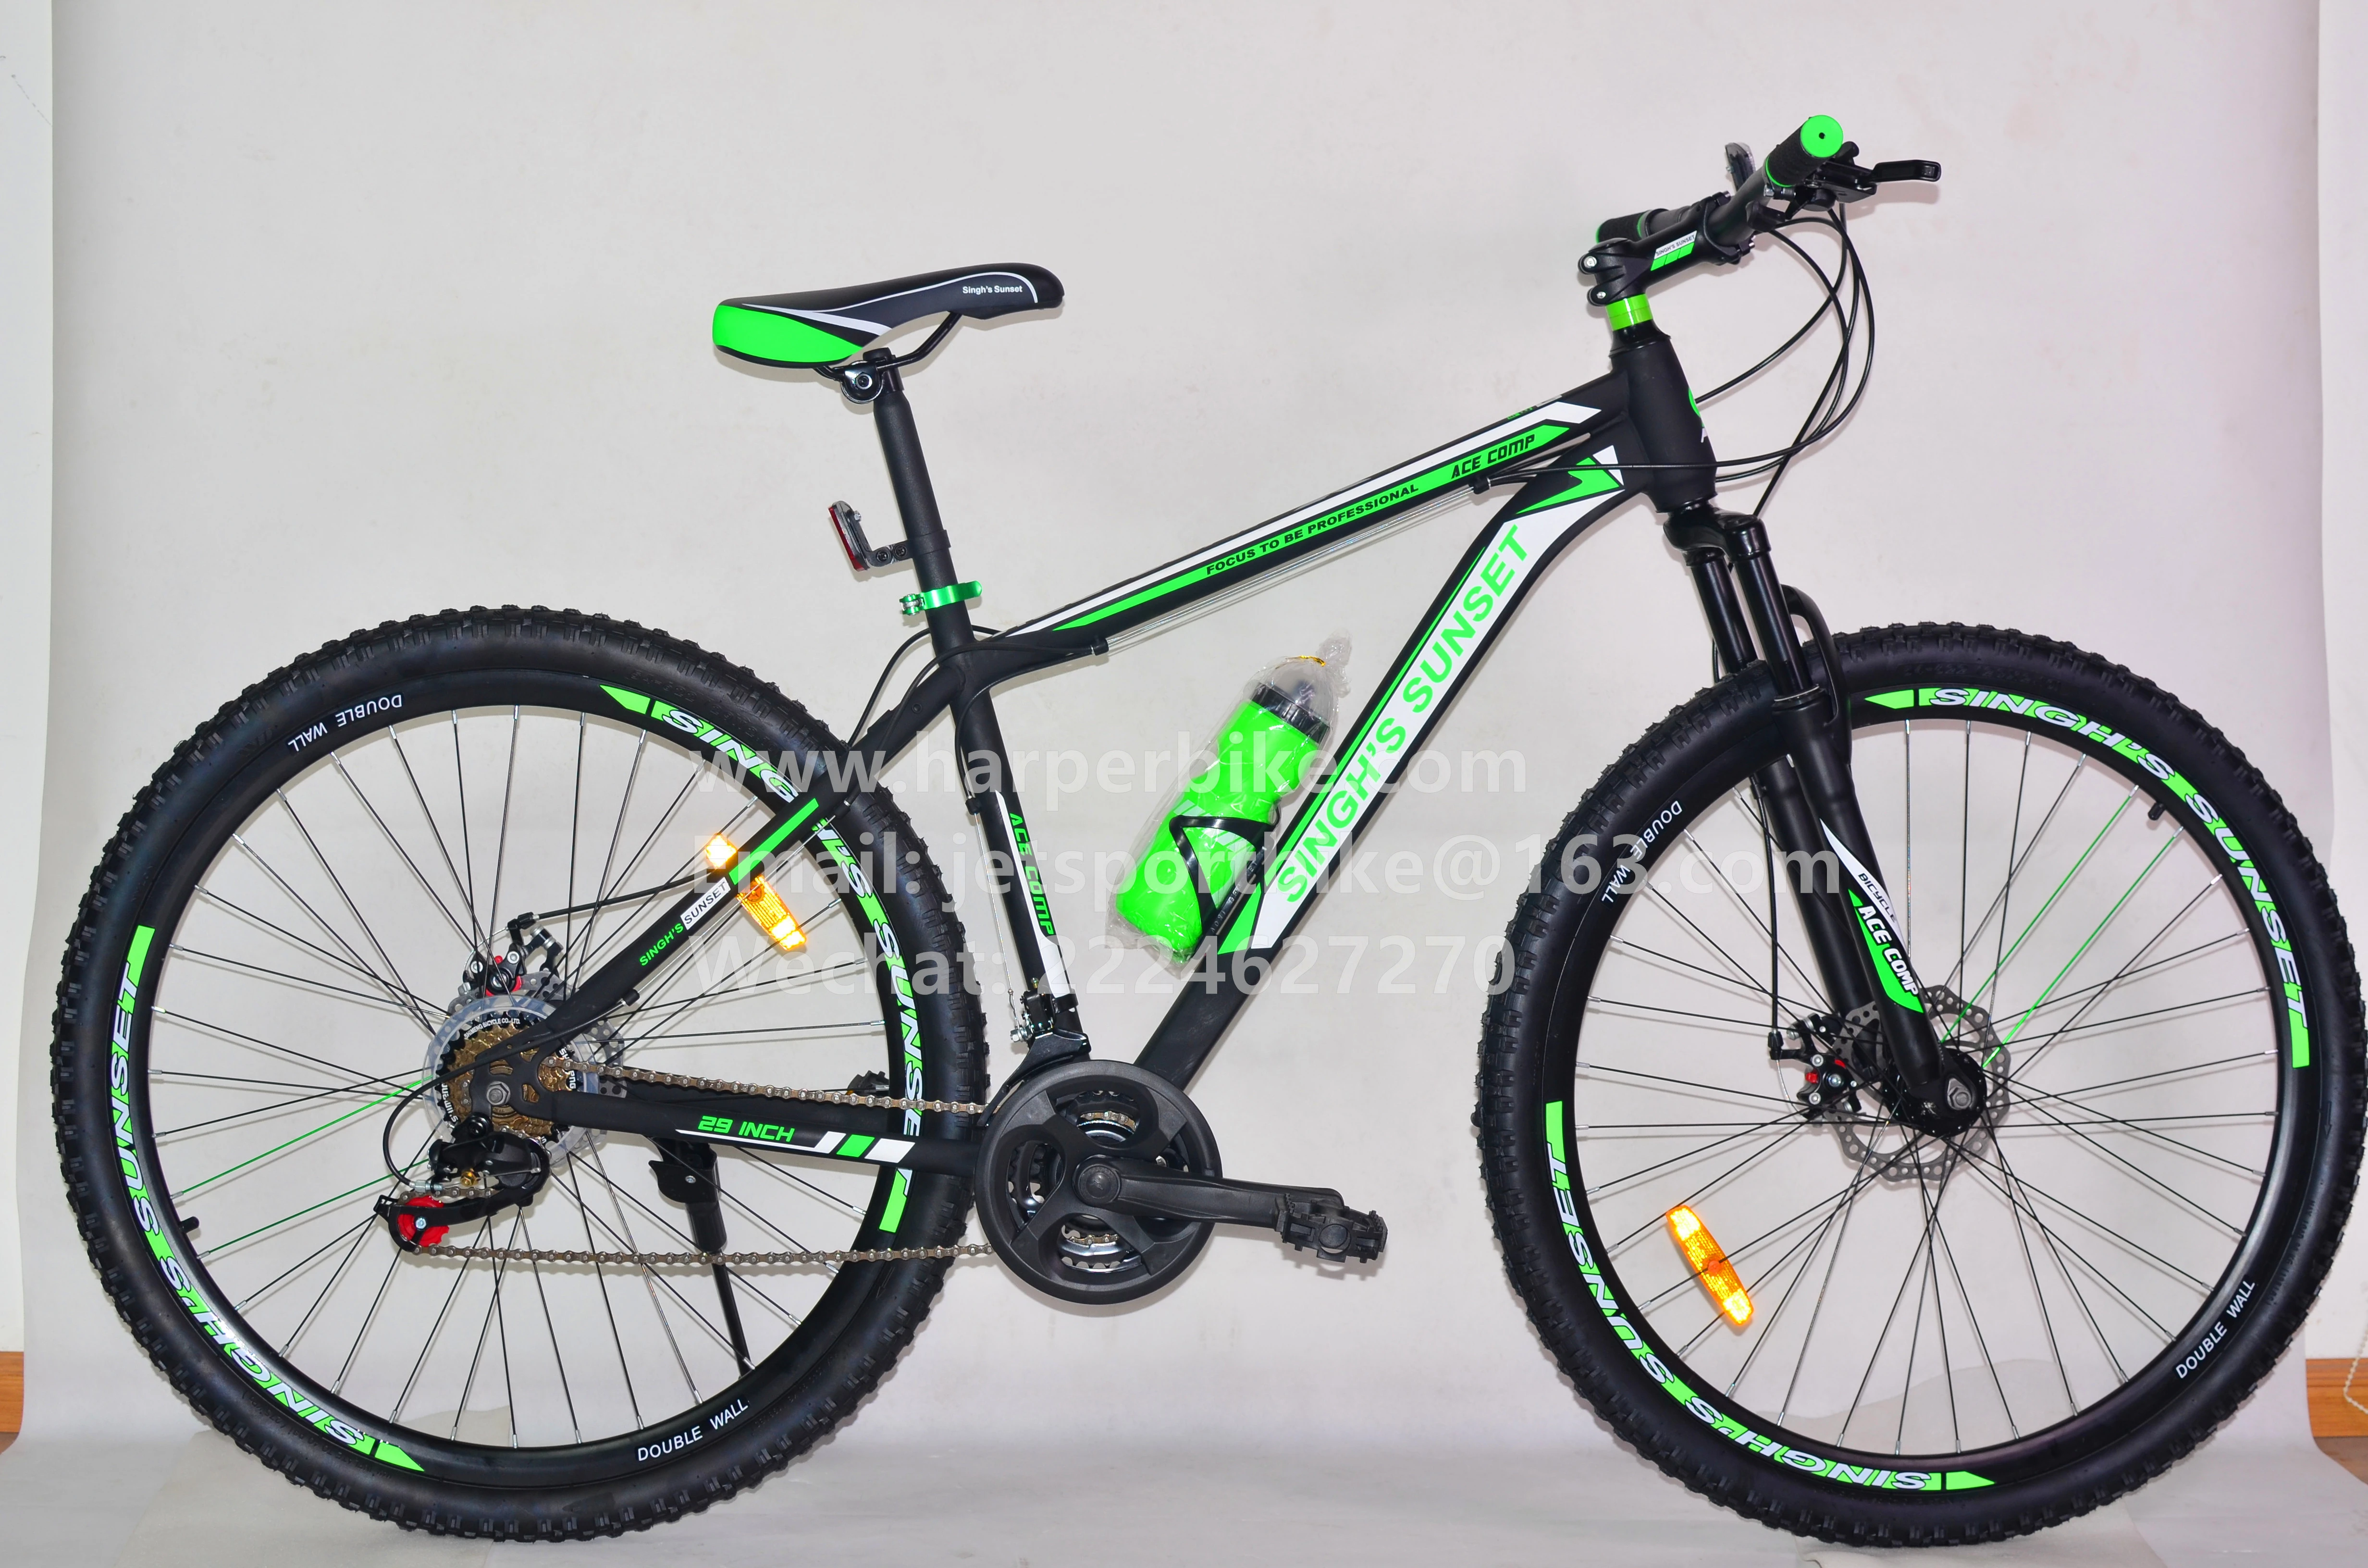 Good value bicycle 29 inch mtb mountain bike 29er with 21 speeds